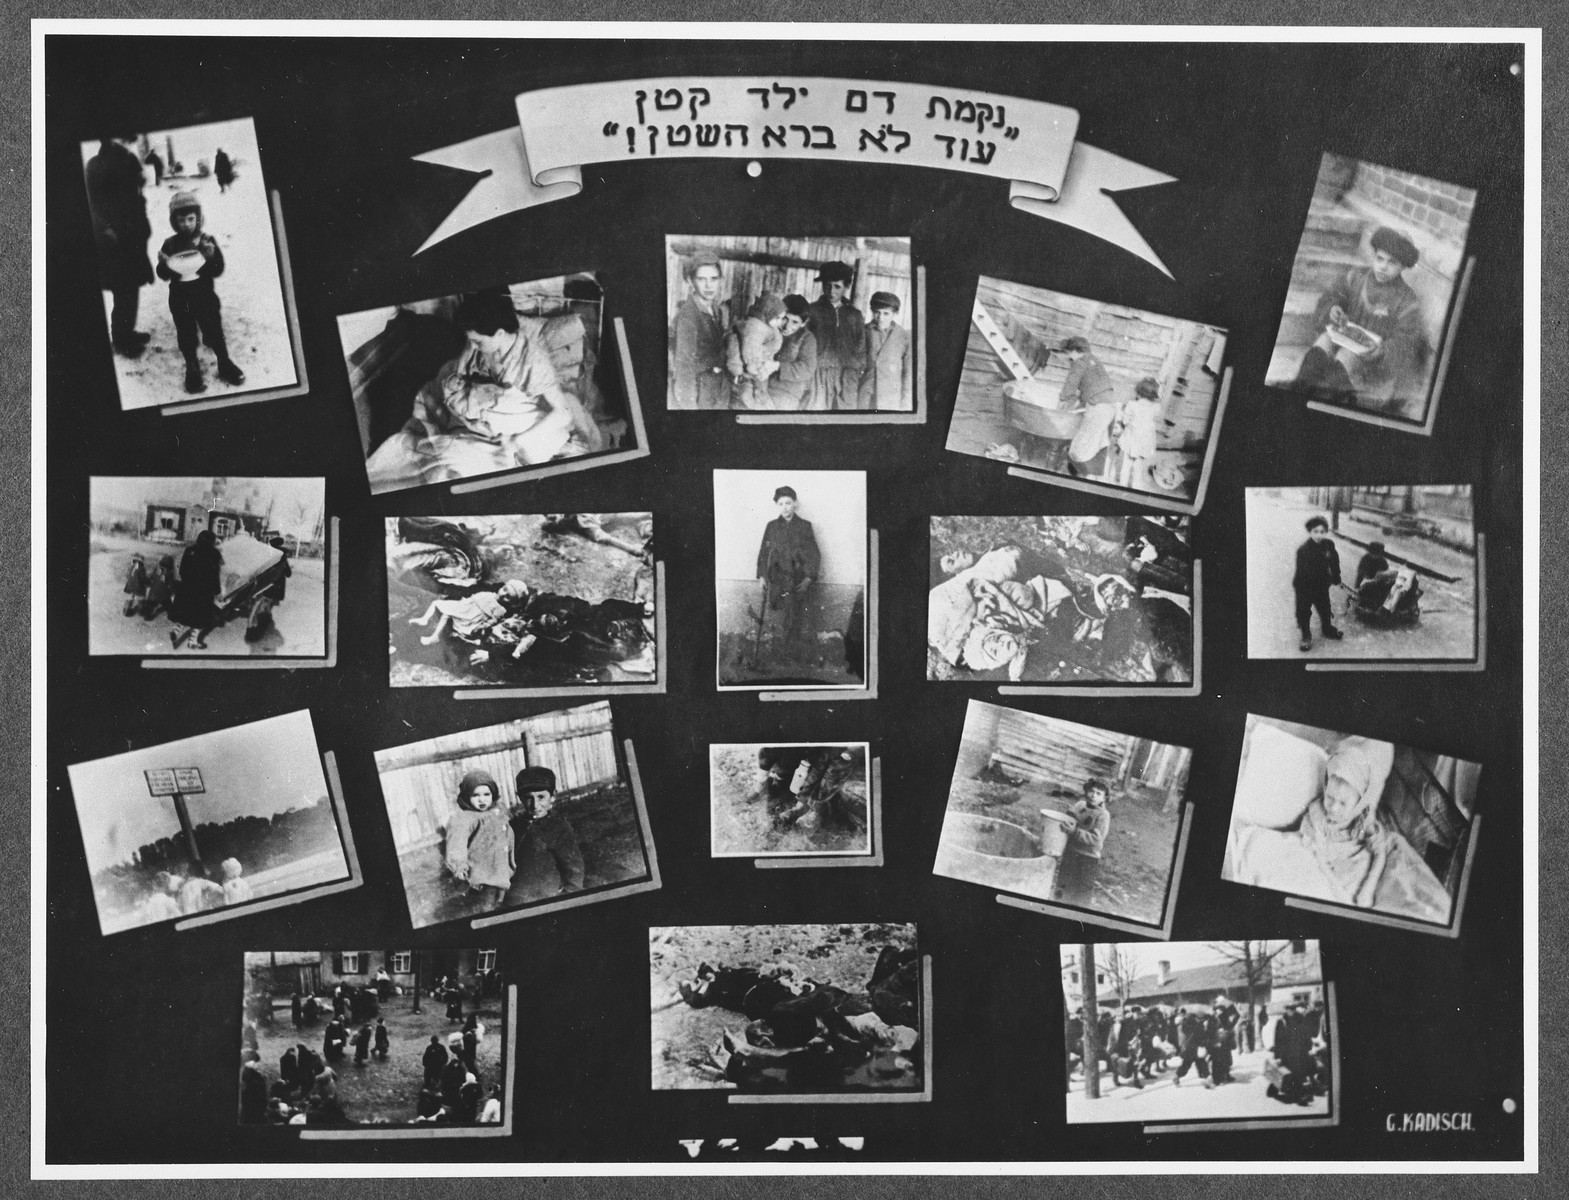 Display panel from a photo exhibition on the Holocaust entitled "Even Satan Has not Created Revenge for a Young Child" created by photographer George Kaddish in a displaced persons' camp.

The exhibition consisted both of photographs that he shot in the Kovno ghetto as well as other photographs he collected from other ghettos and camps.

The title is a quotation from a poem about a prewar pogrom by Chaim Nachman Bialik entitled "On the Slaughter".